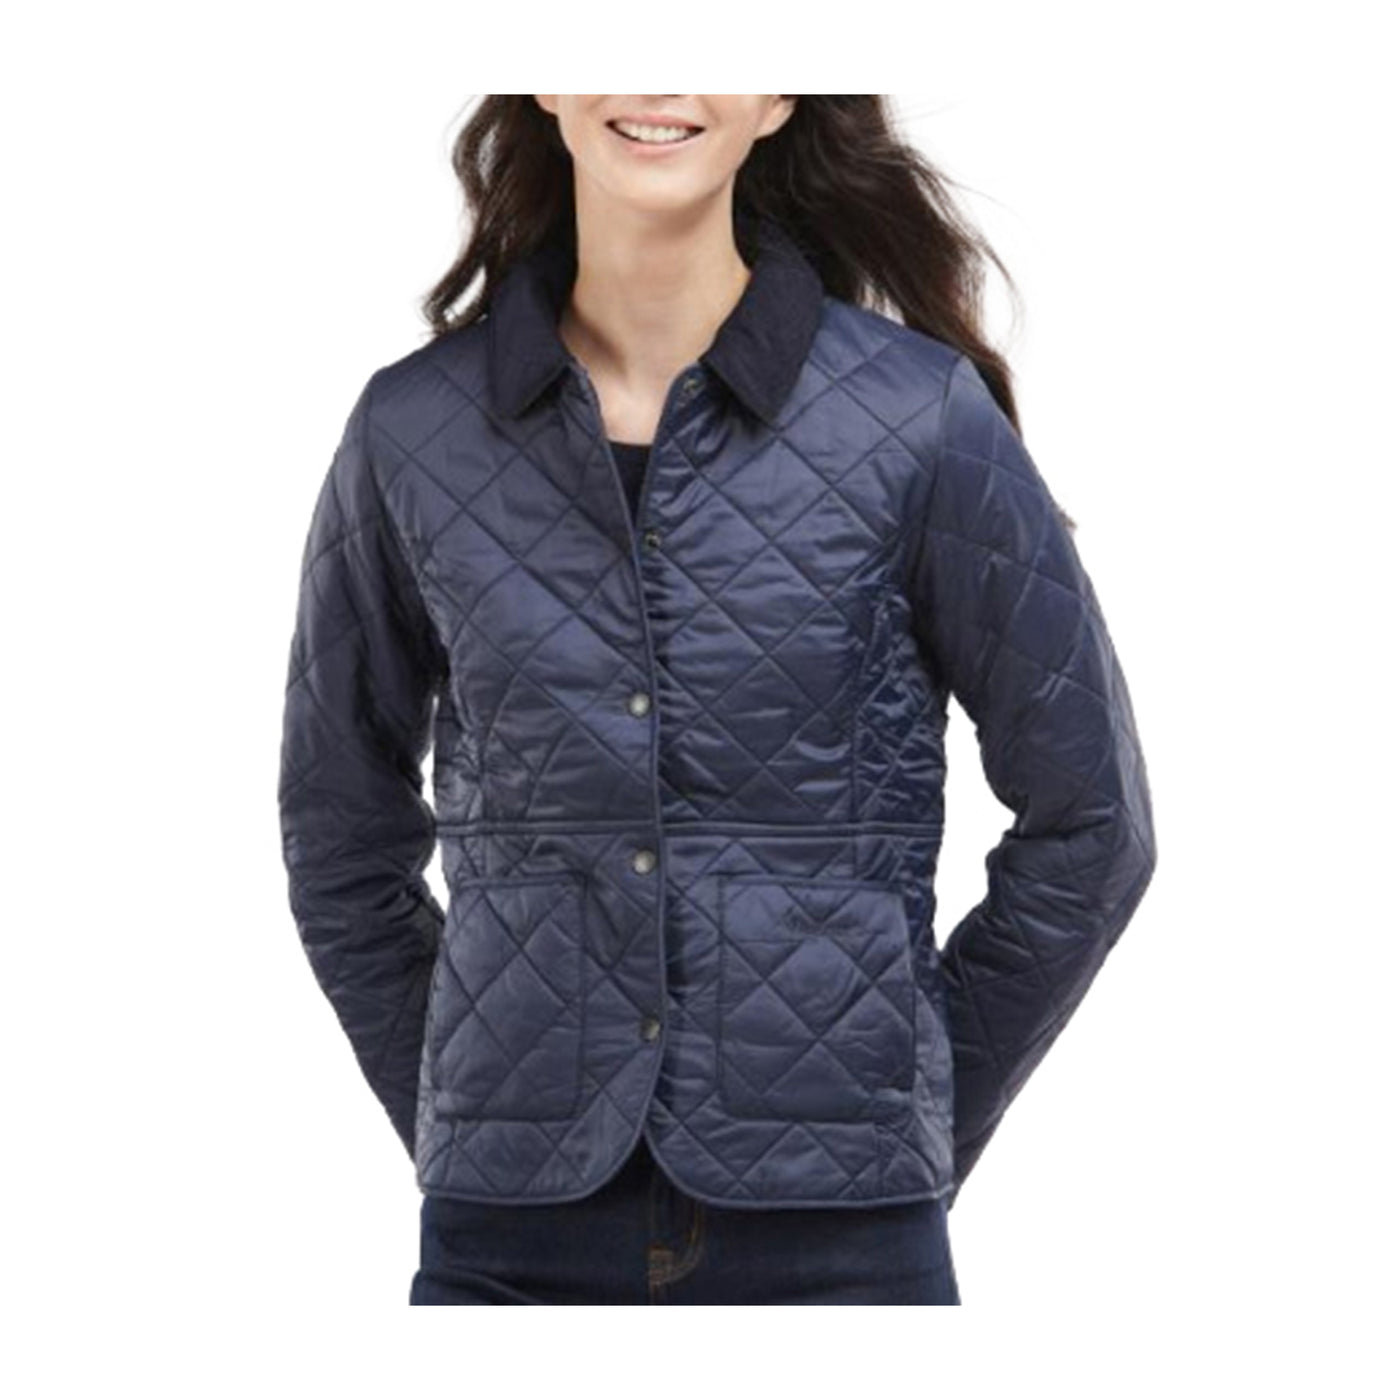 Women's quilted jacket with collar